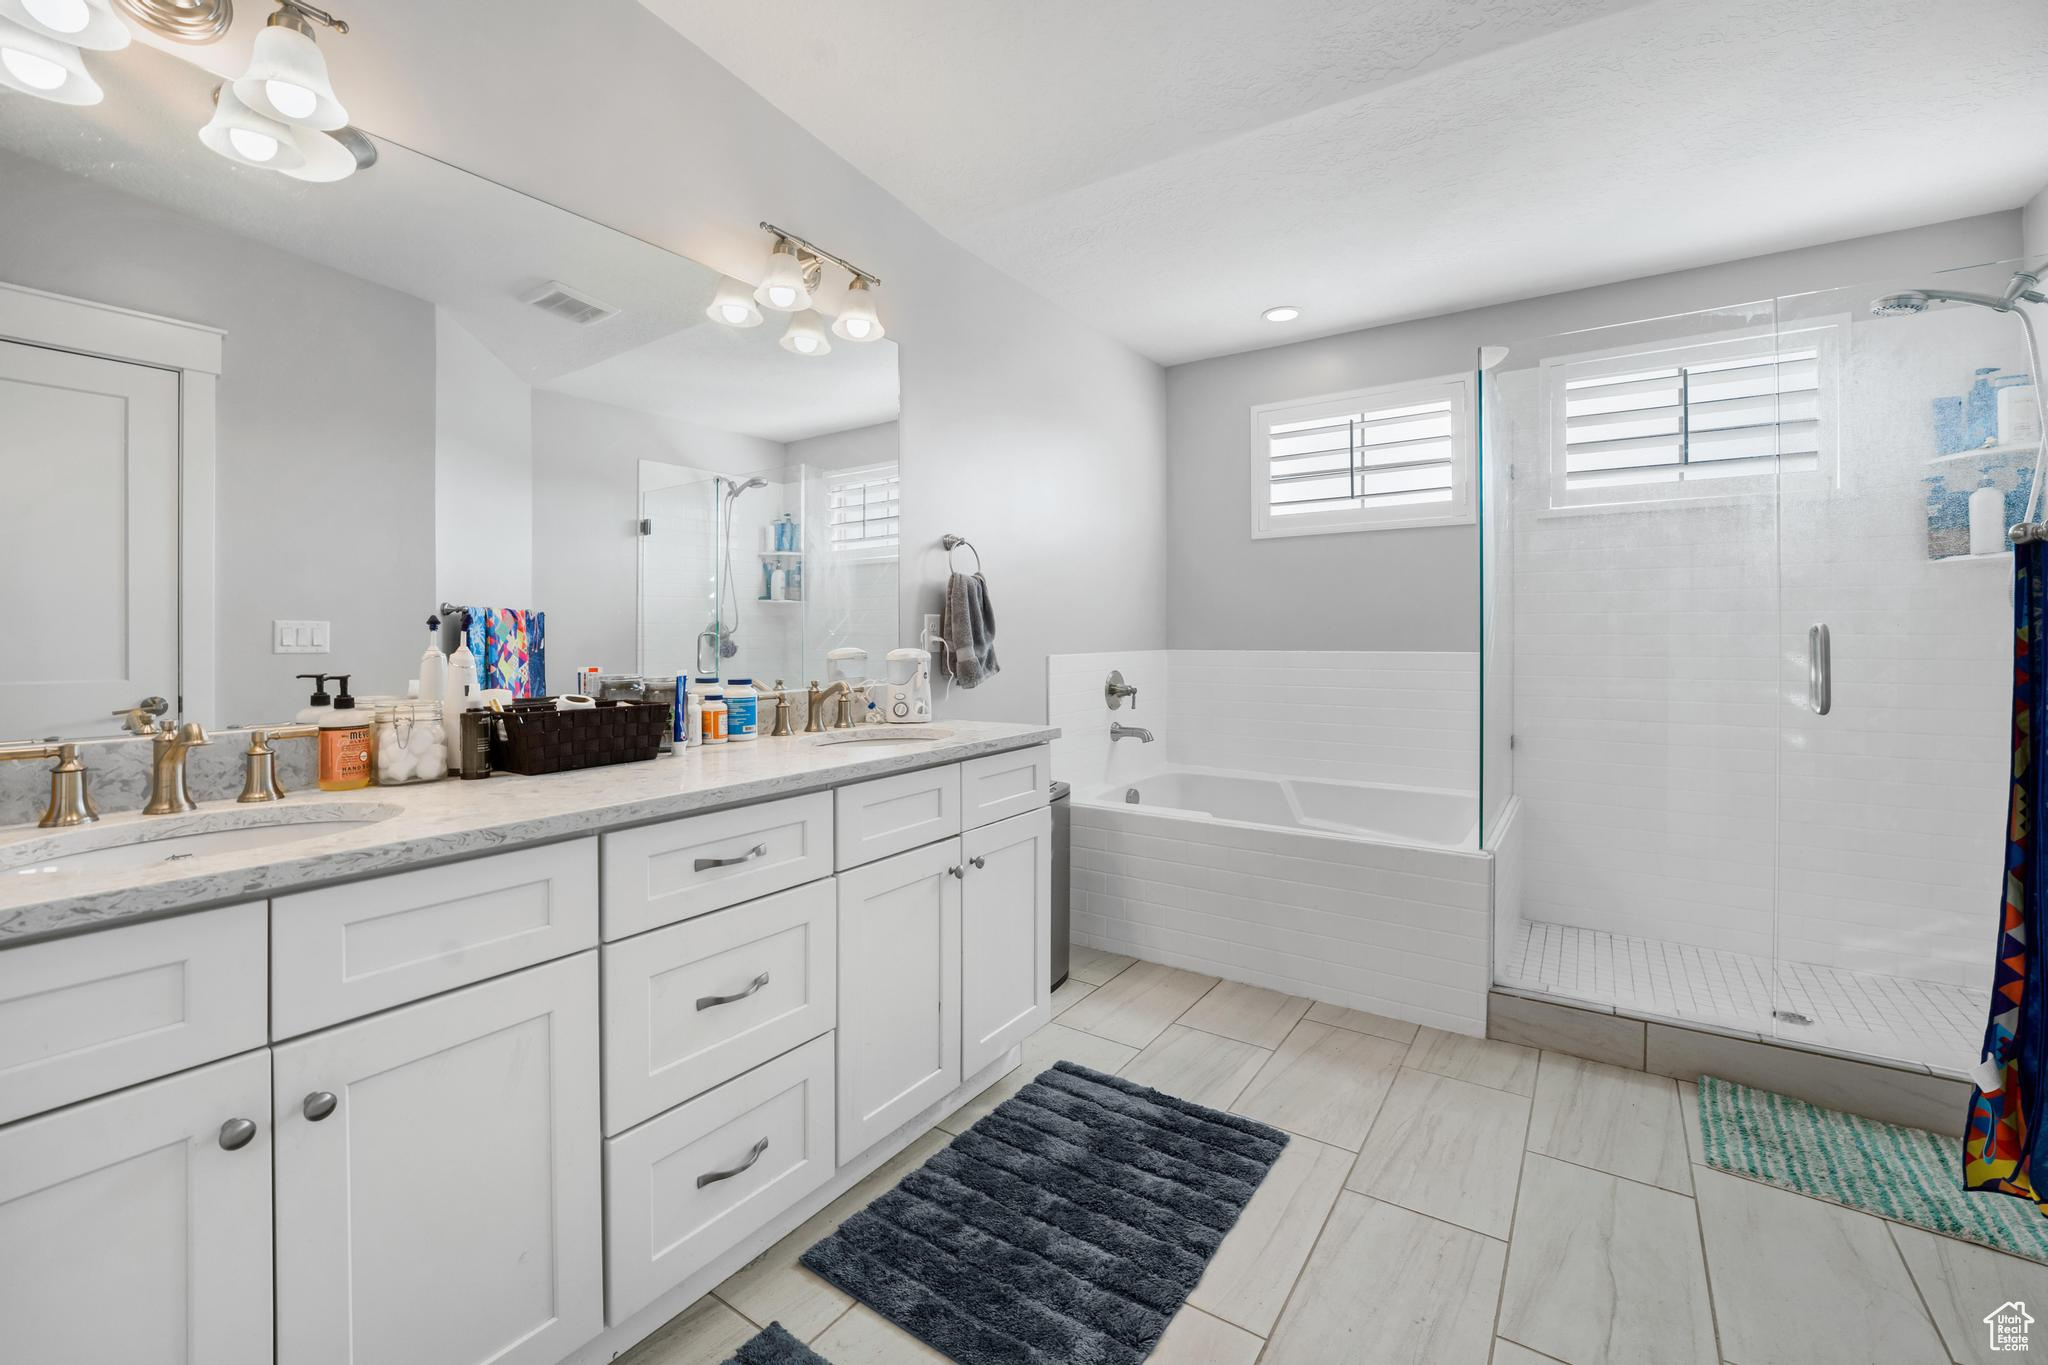 Bathroom featuring shower with separate bathtub, large vanity, double sink, and tile flooring